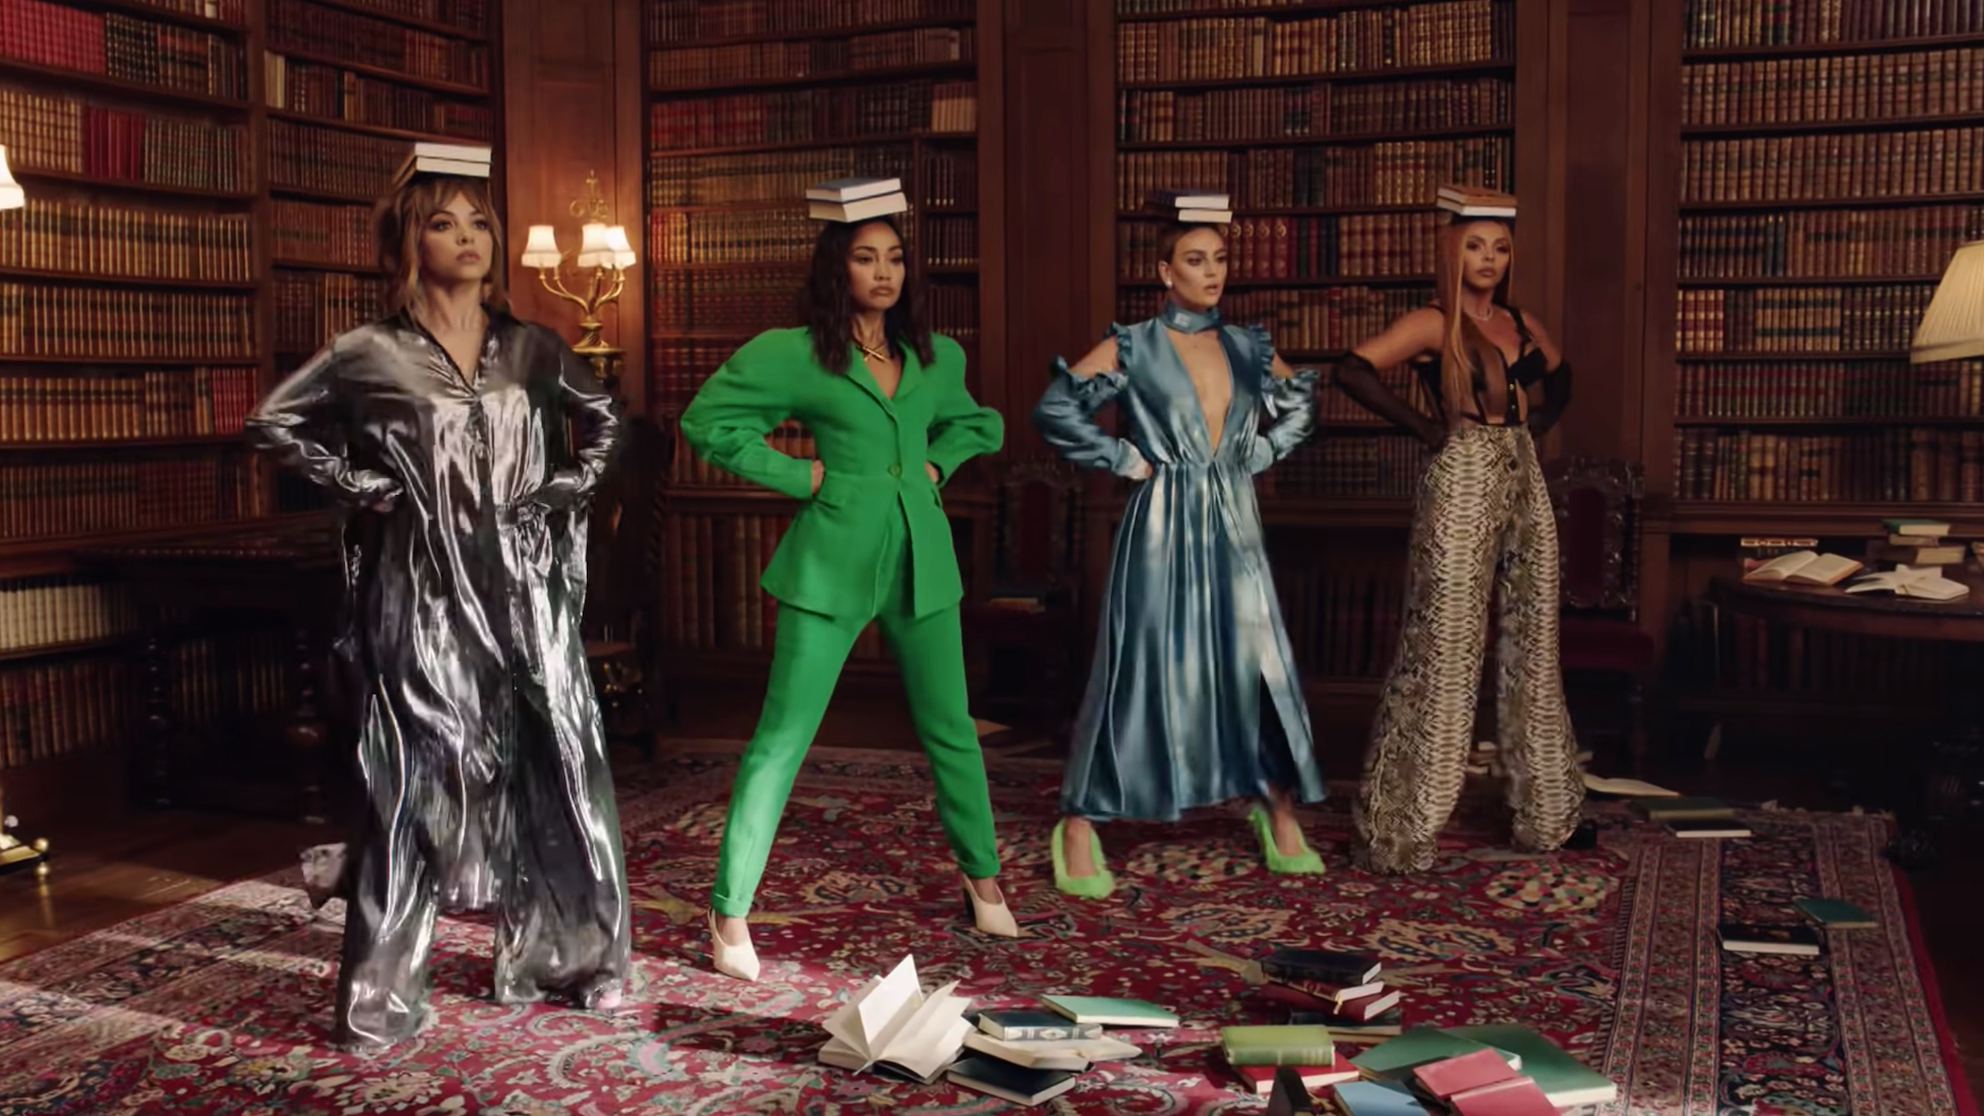 Little Mix can't be tamed in new video for Woman Like Me